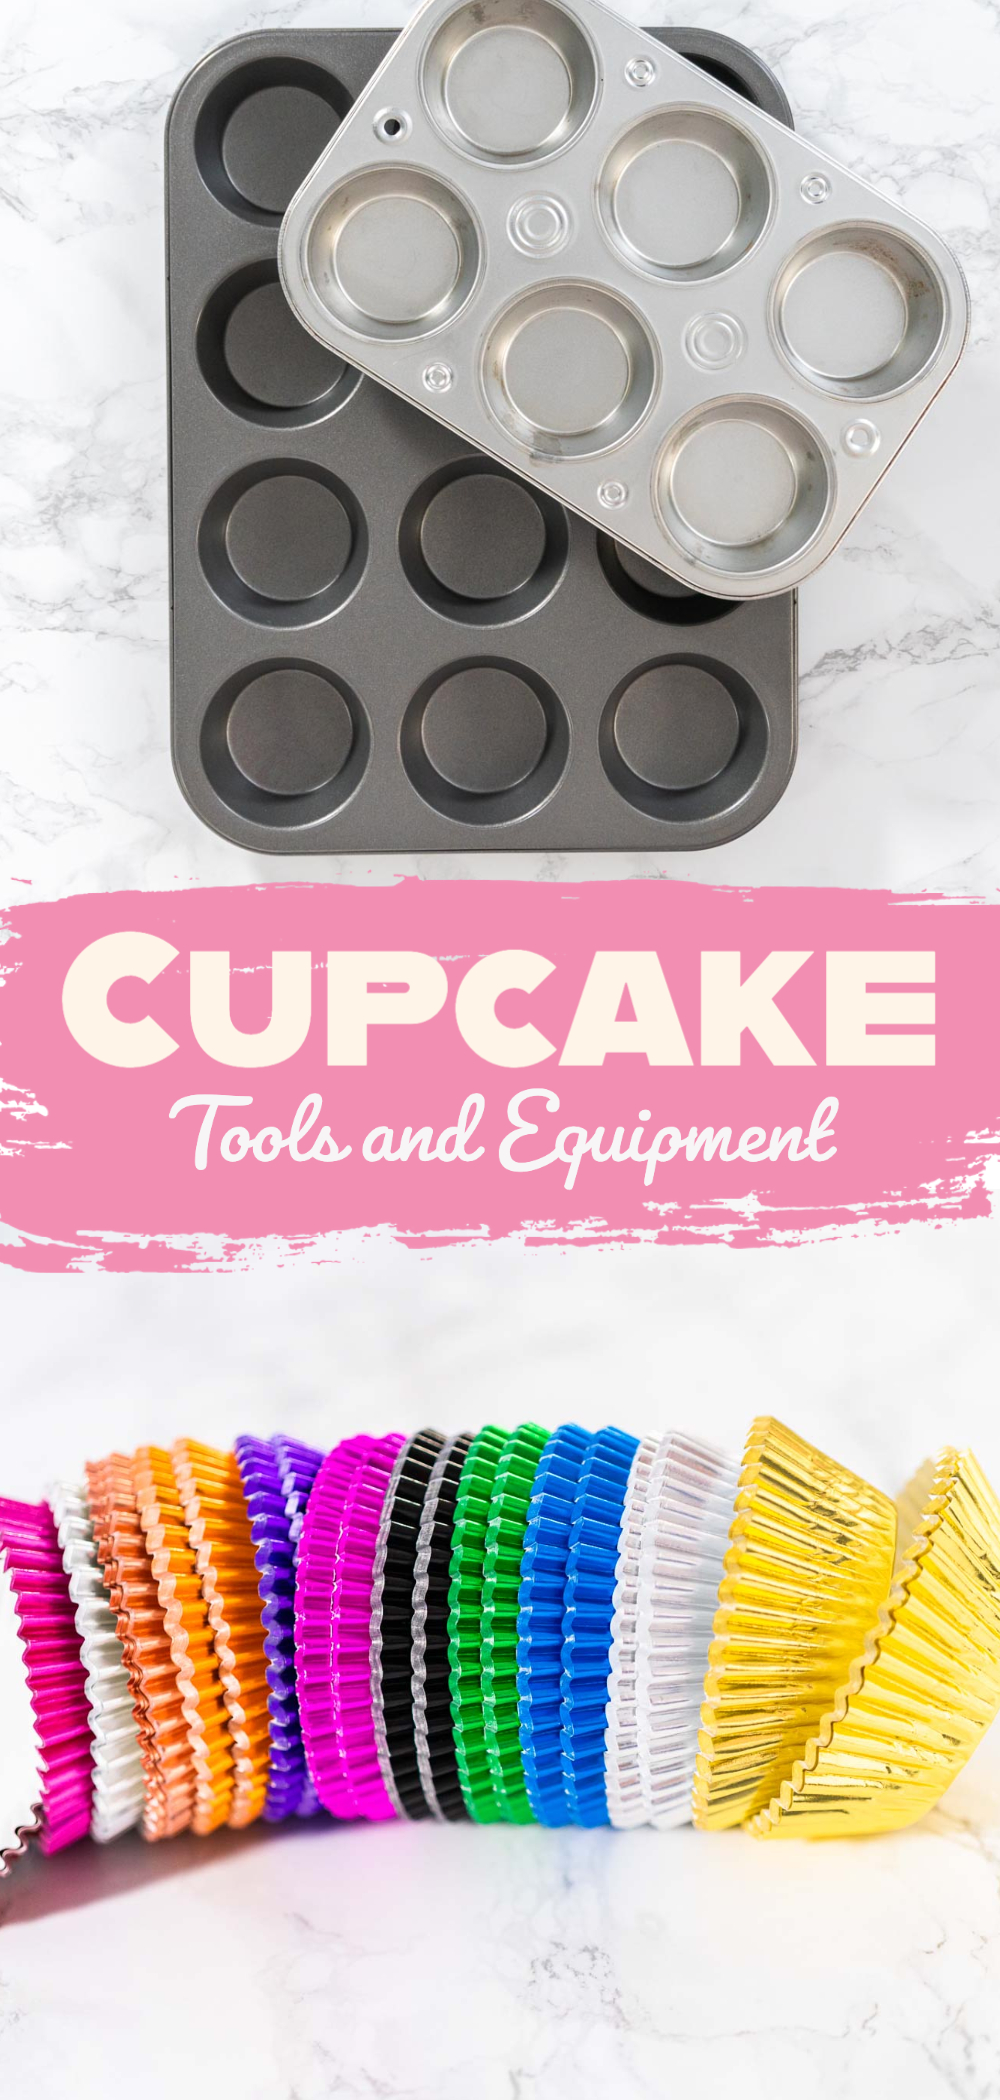 Cupcake Tools and Equipment